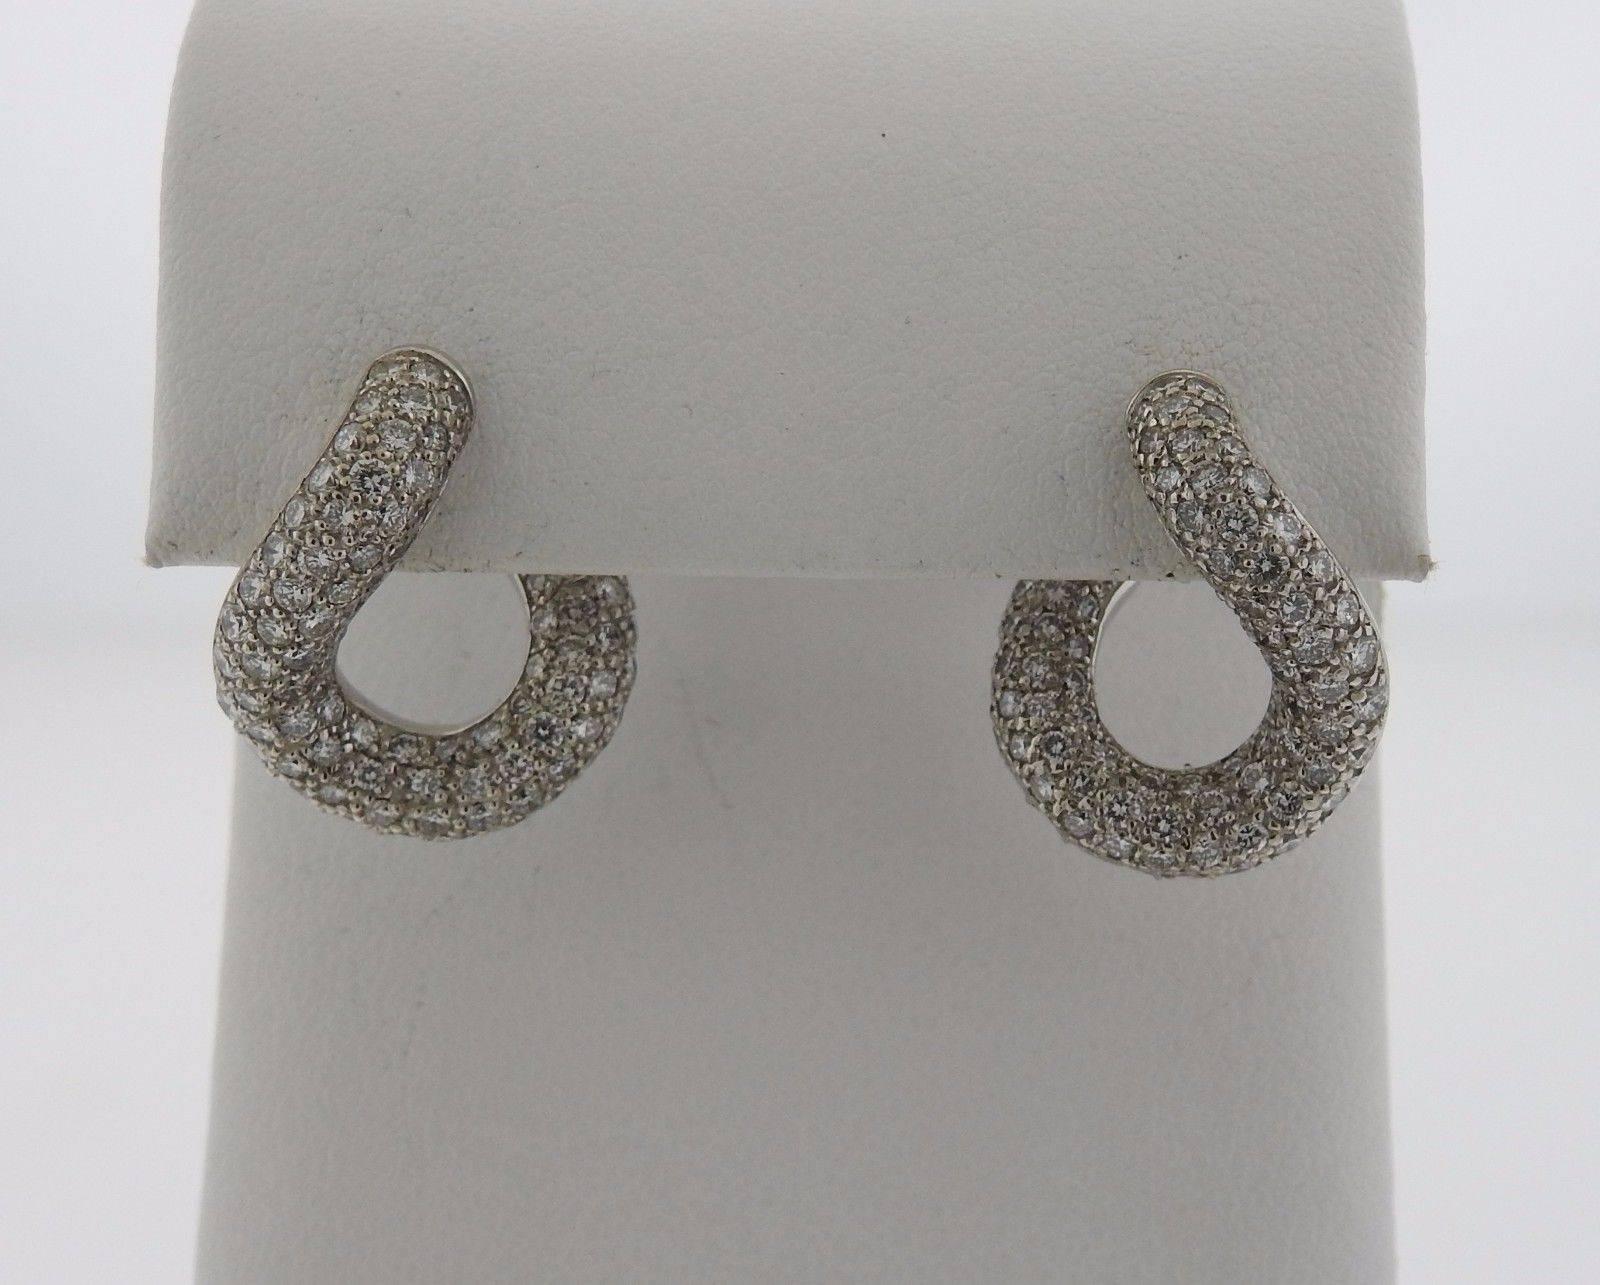 A pair of 18k white gold earrings set with approximately 2.97 ctw of G/VS diamonds.  The earrings measure 20mm x 17mm and weigh 13.6 grams. Marked: Pomellato, 750.  Current retail is $21090.